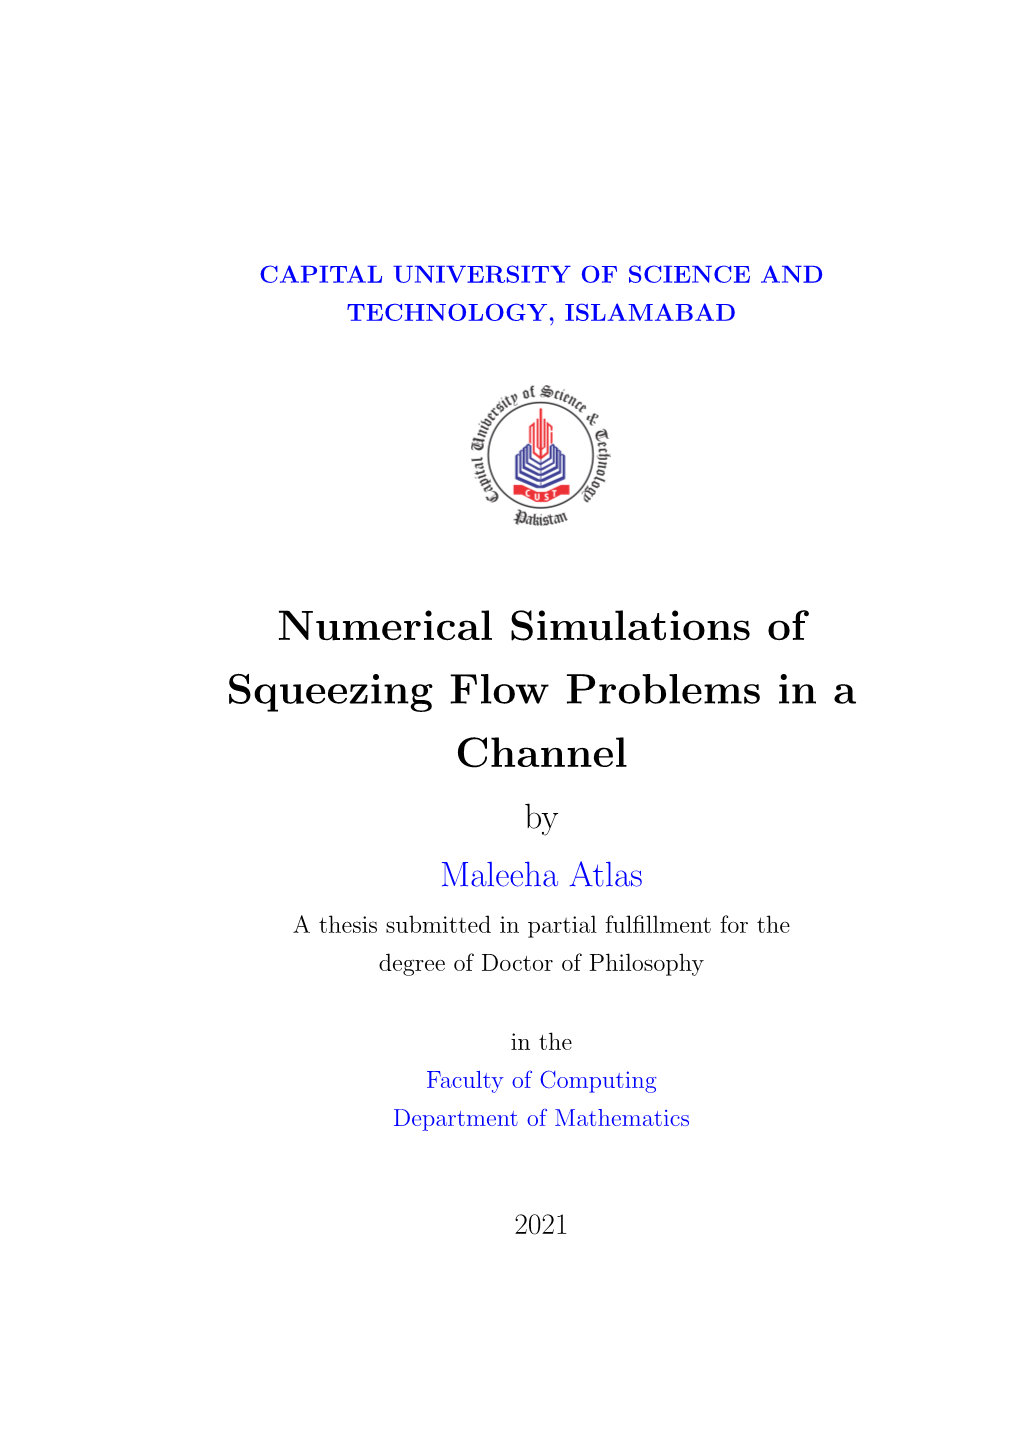 Numerical Simulations of Squeezing Flow Problems in a Channel by Maleeha Atlas a Thesis Submitted in Partial Fulﬁllment for the Degree of Doctor of Philosophy